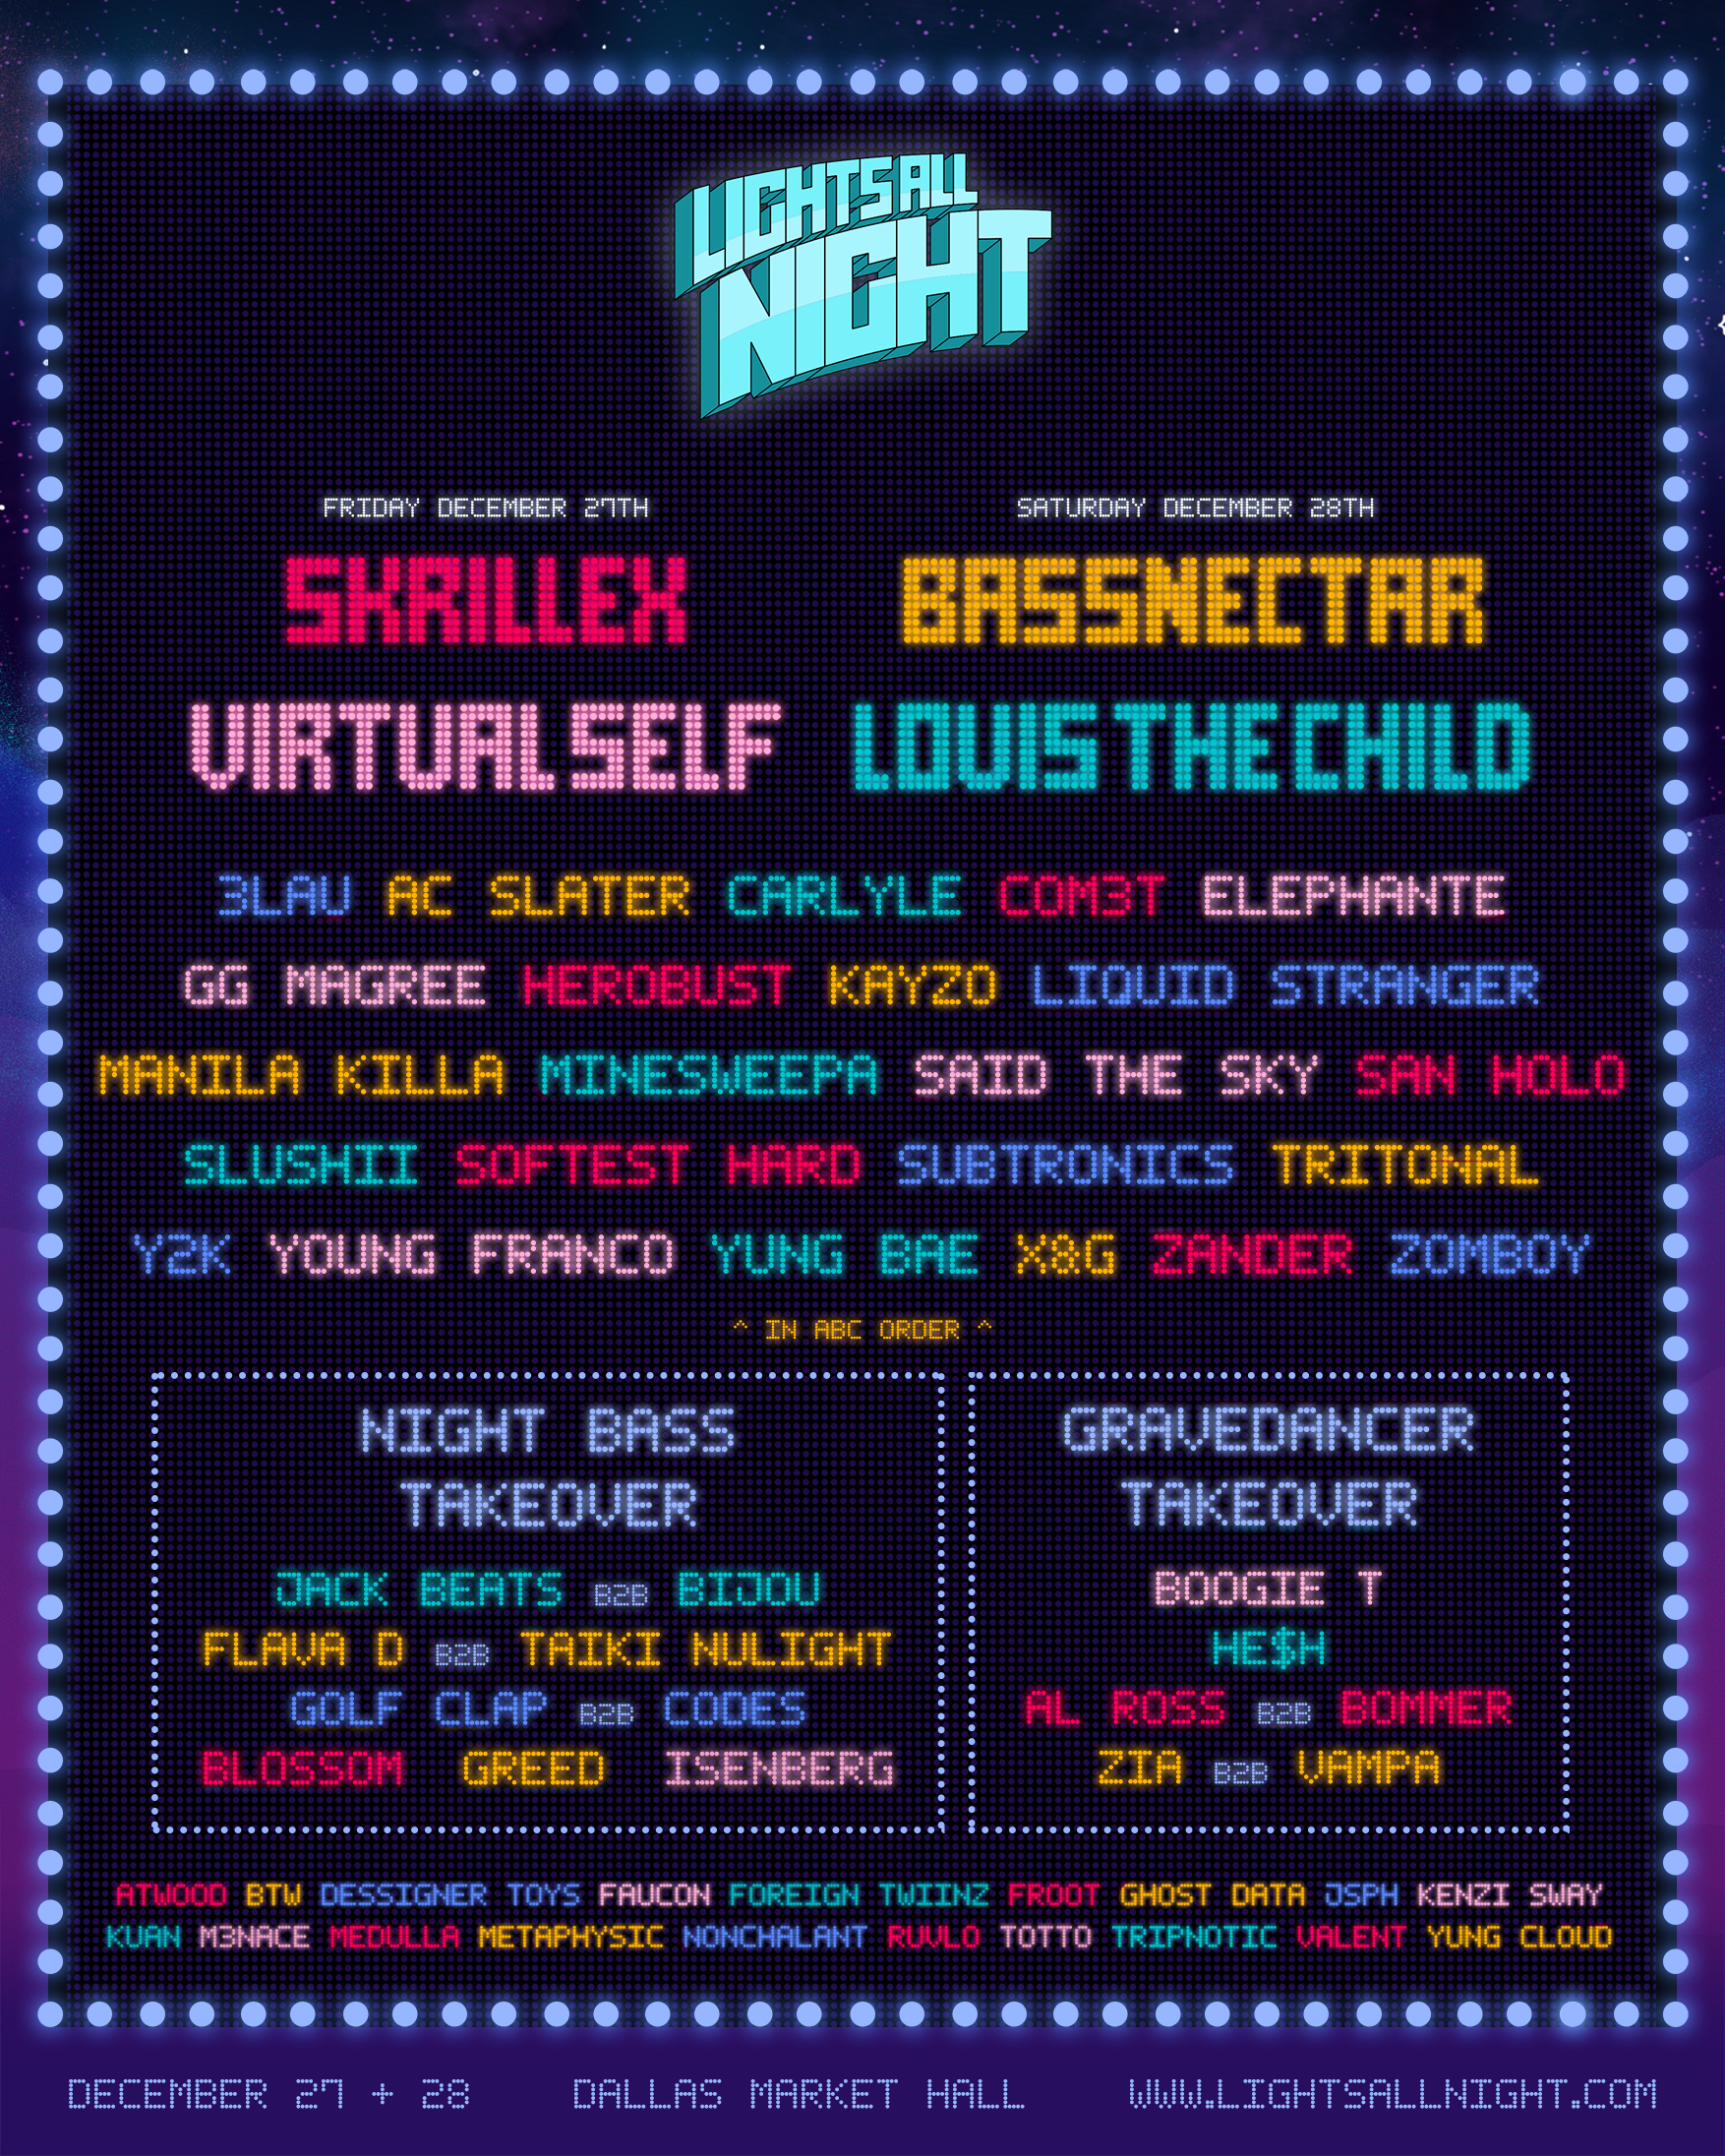 Lights All Night Delivers on Final Announcements: Schedule, Map, and More